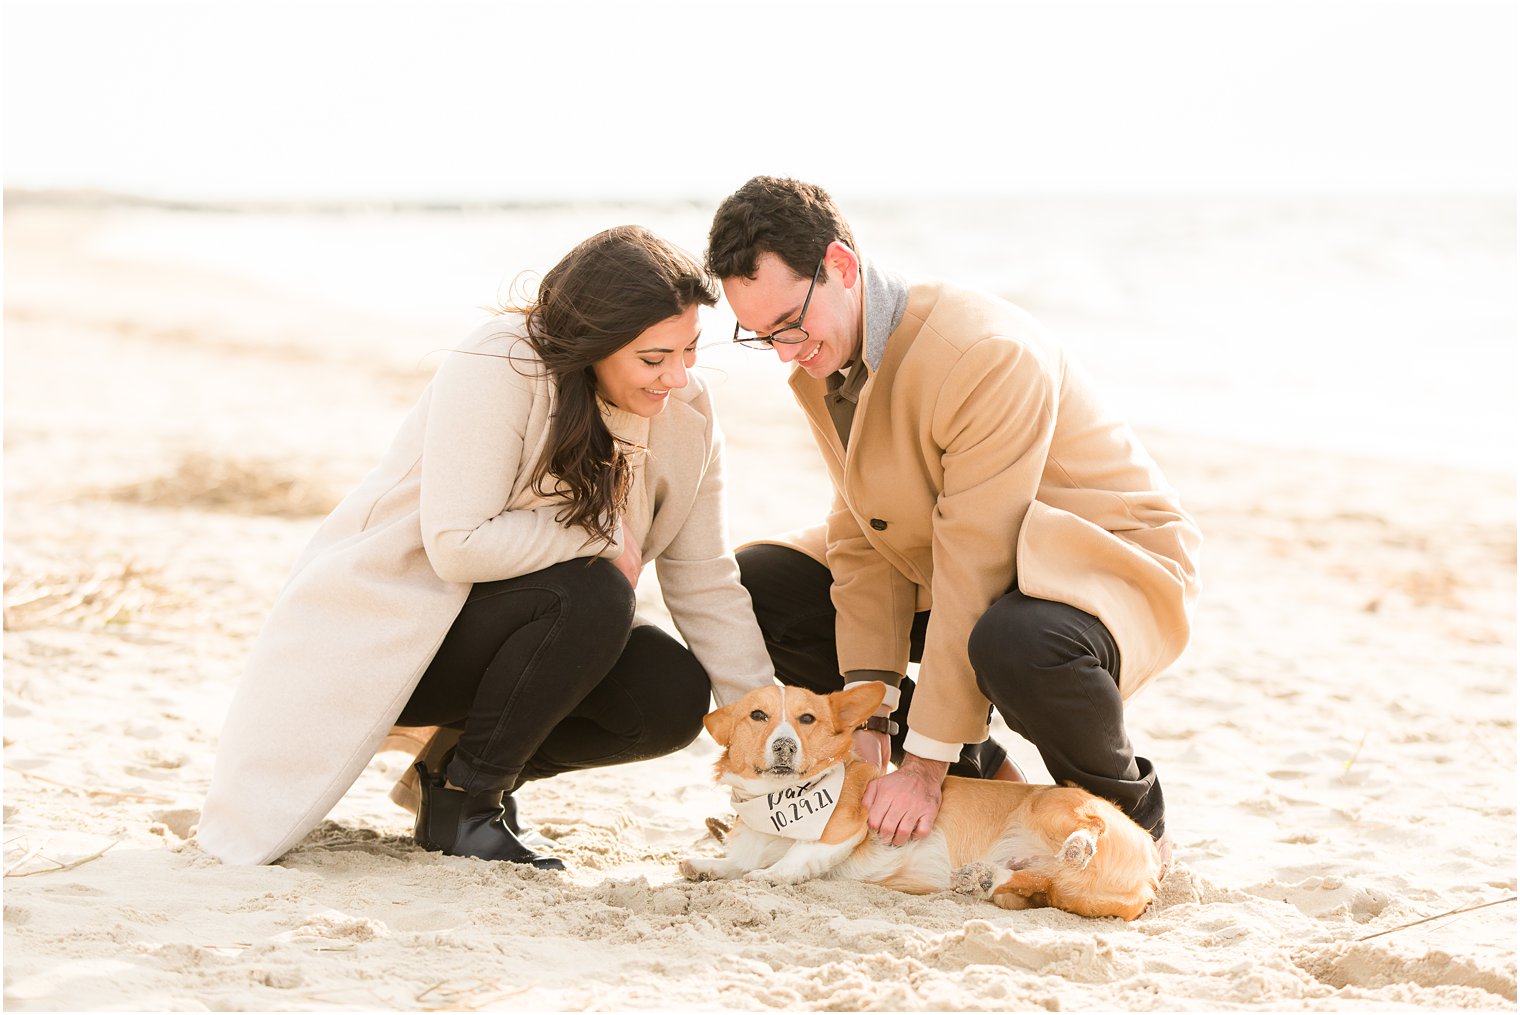 Corgi wearing a Save the Date bandana with engaged couple at the beach